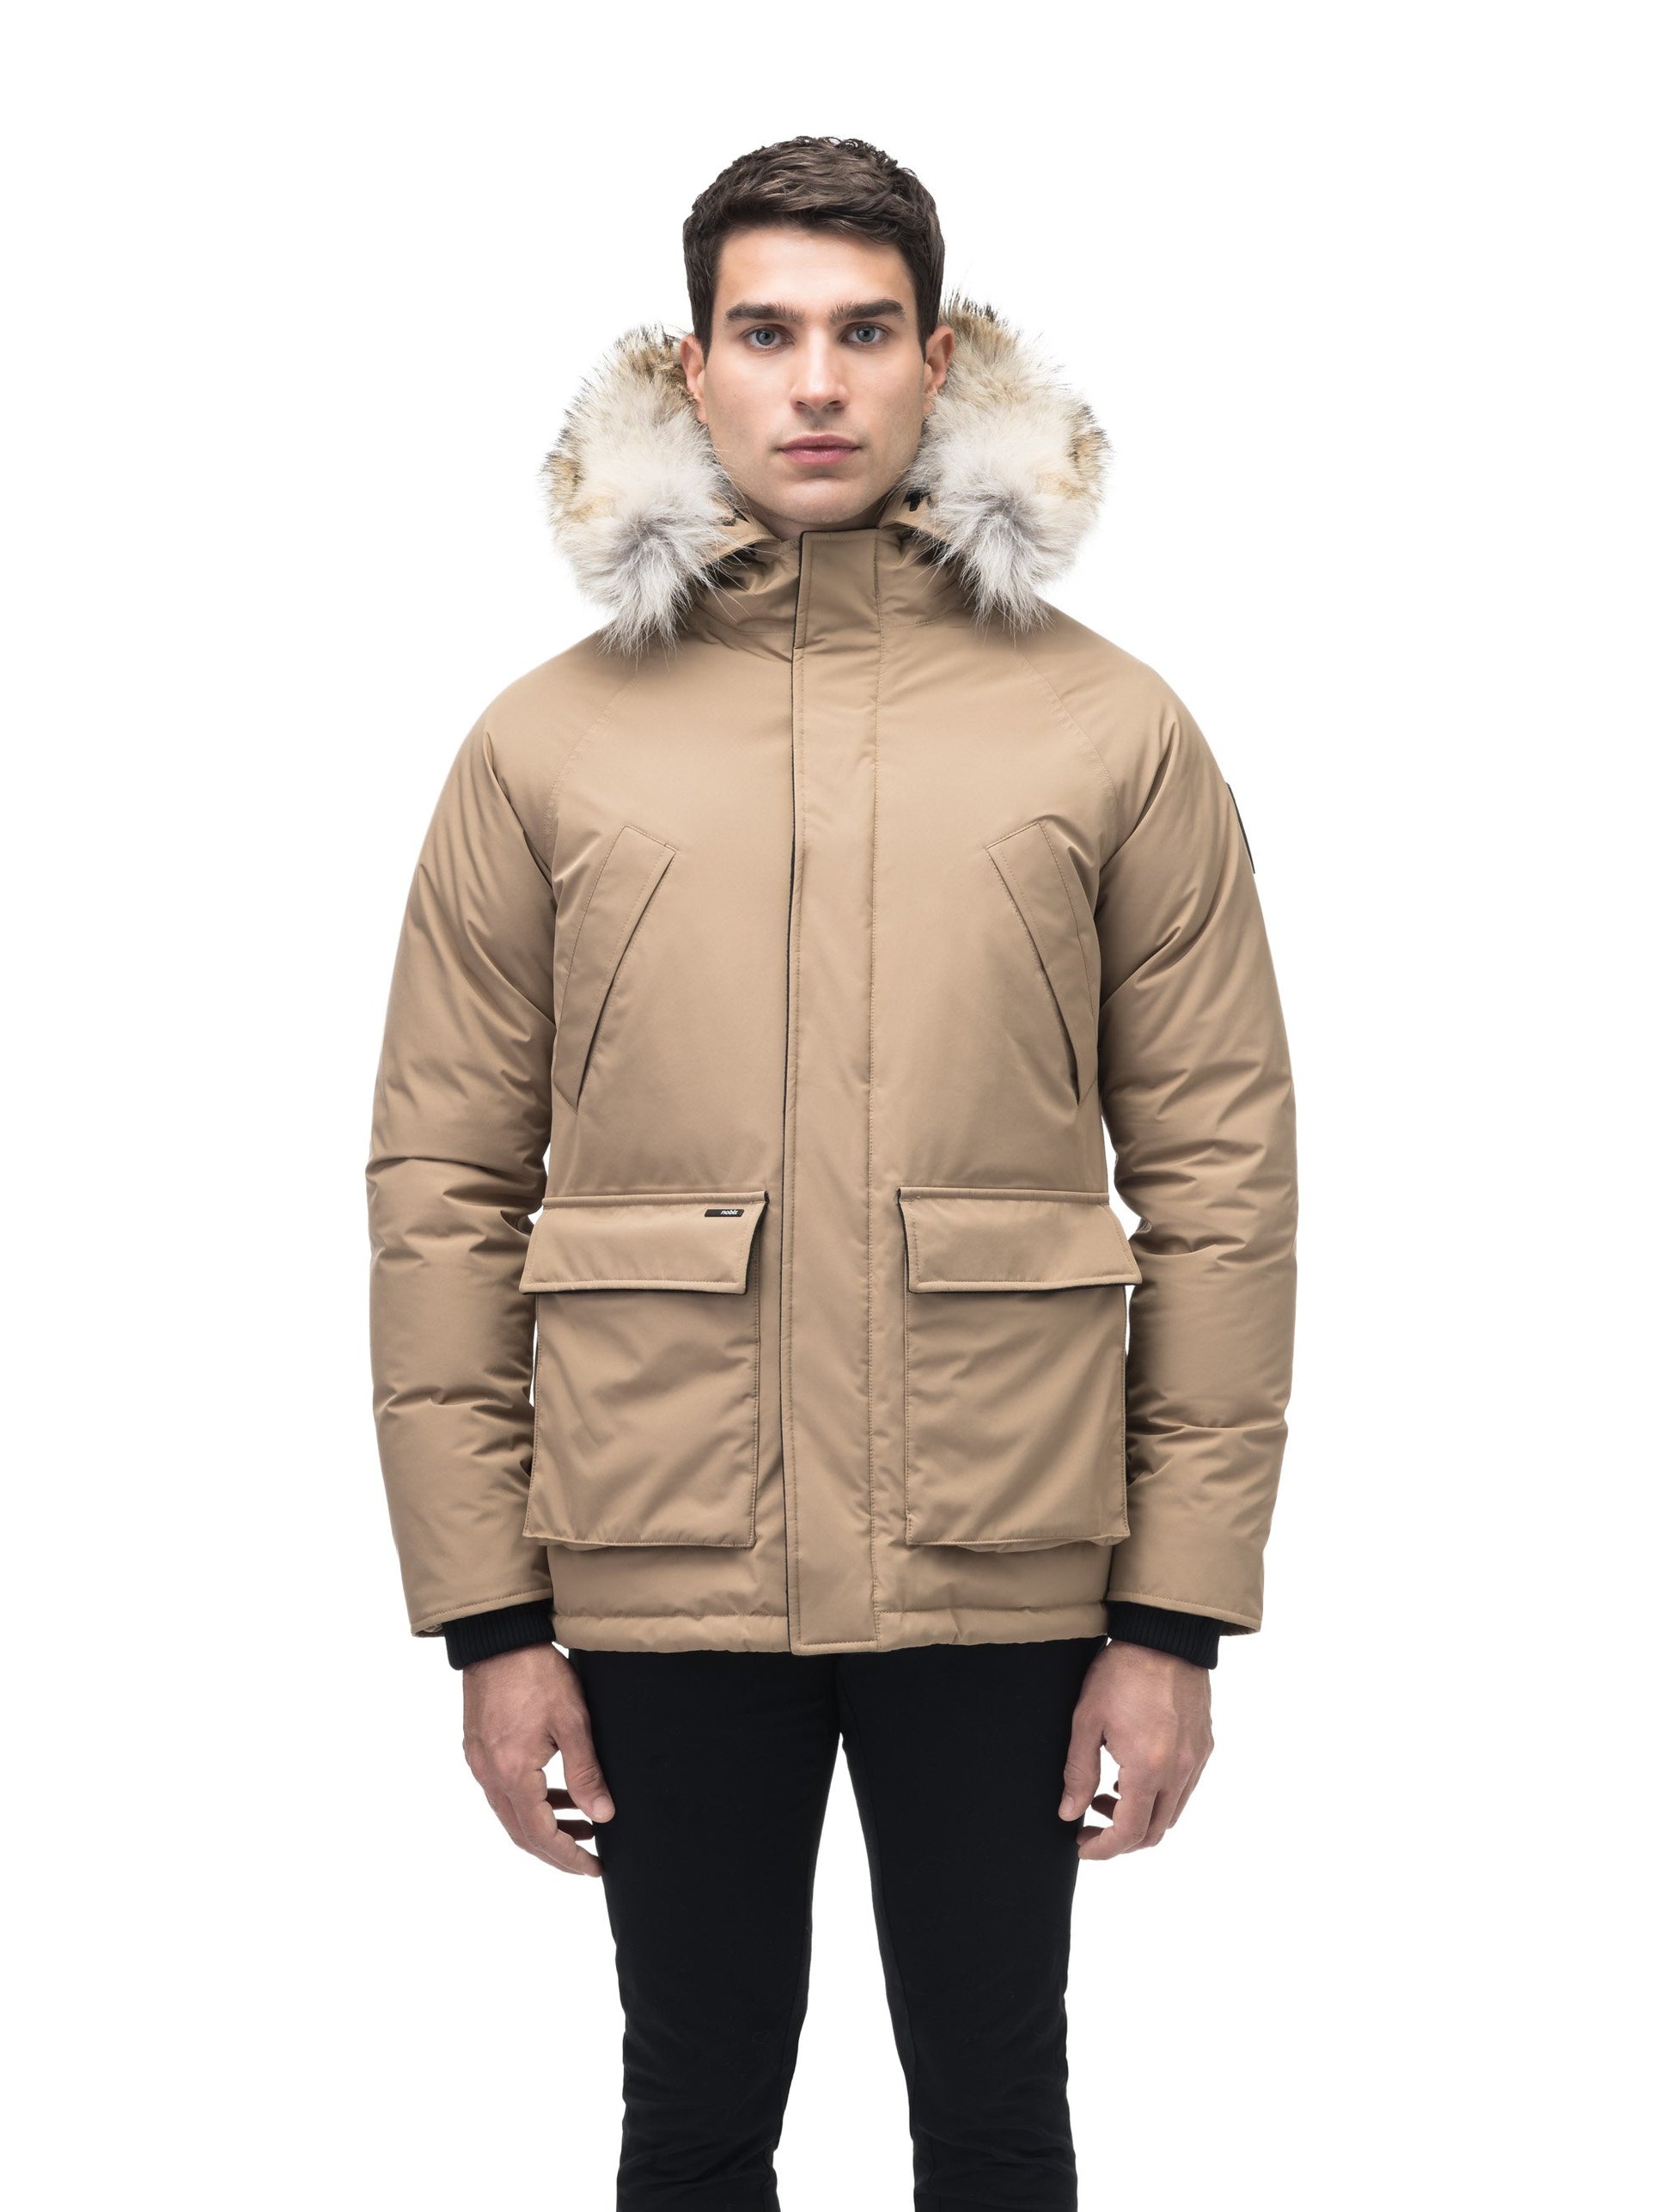 Men's waist length down filled jacket with two front pockets with magnetic closure and a removable fur trim on the hood in Cork